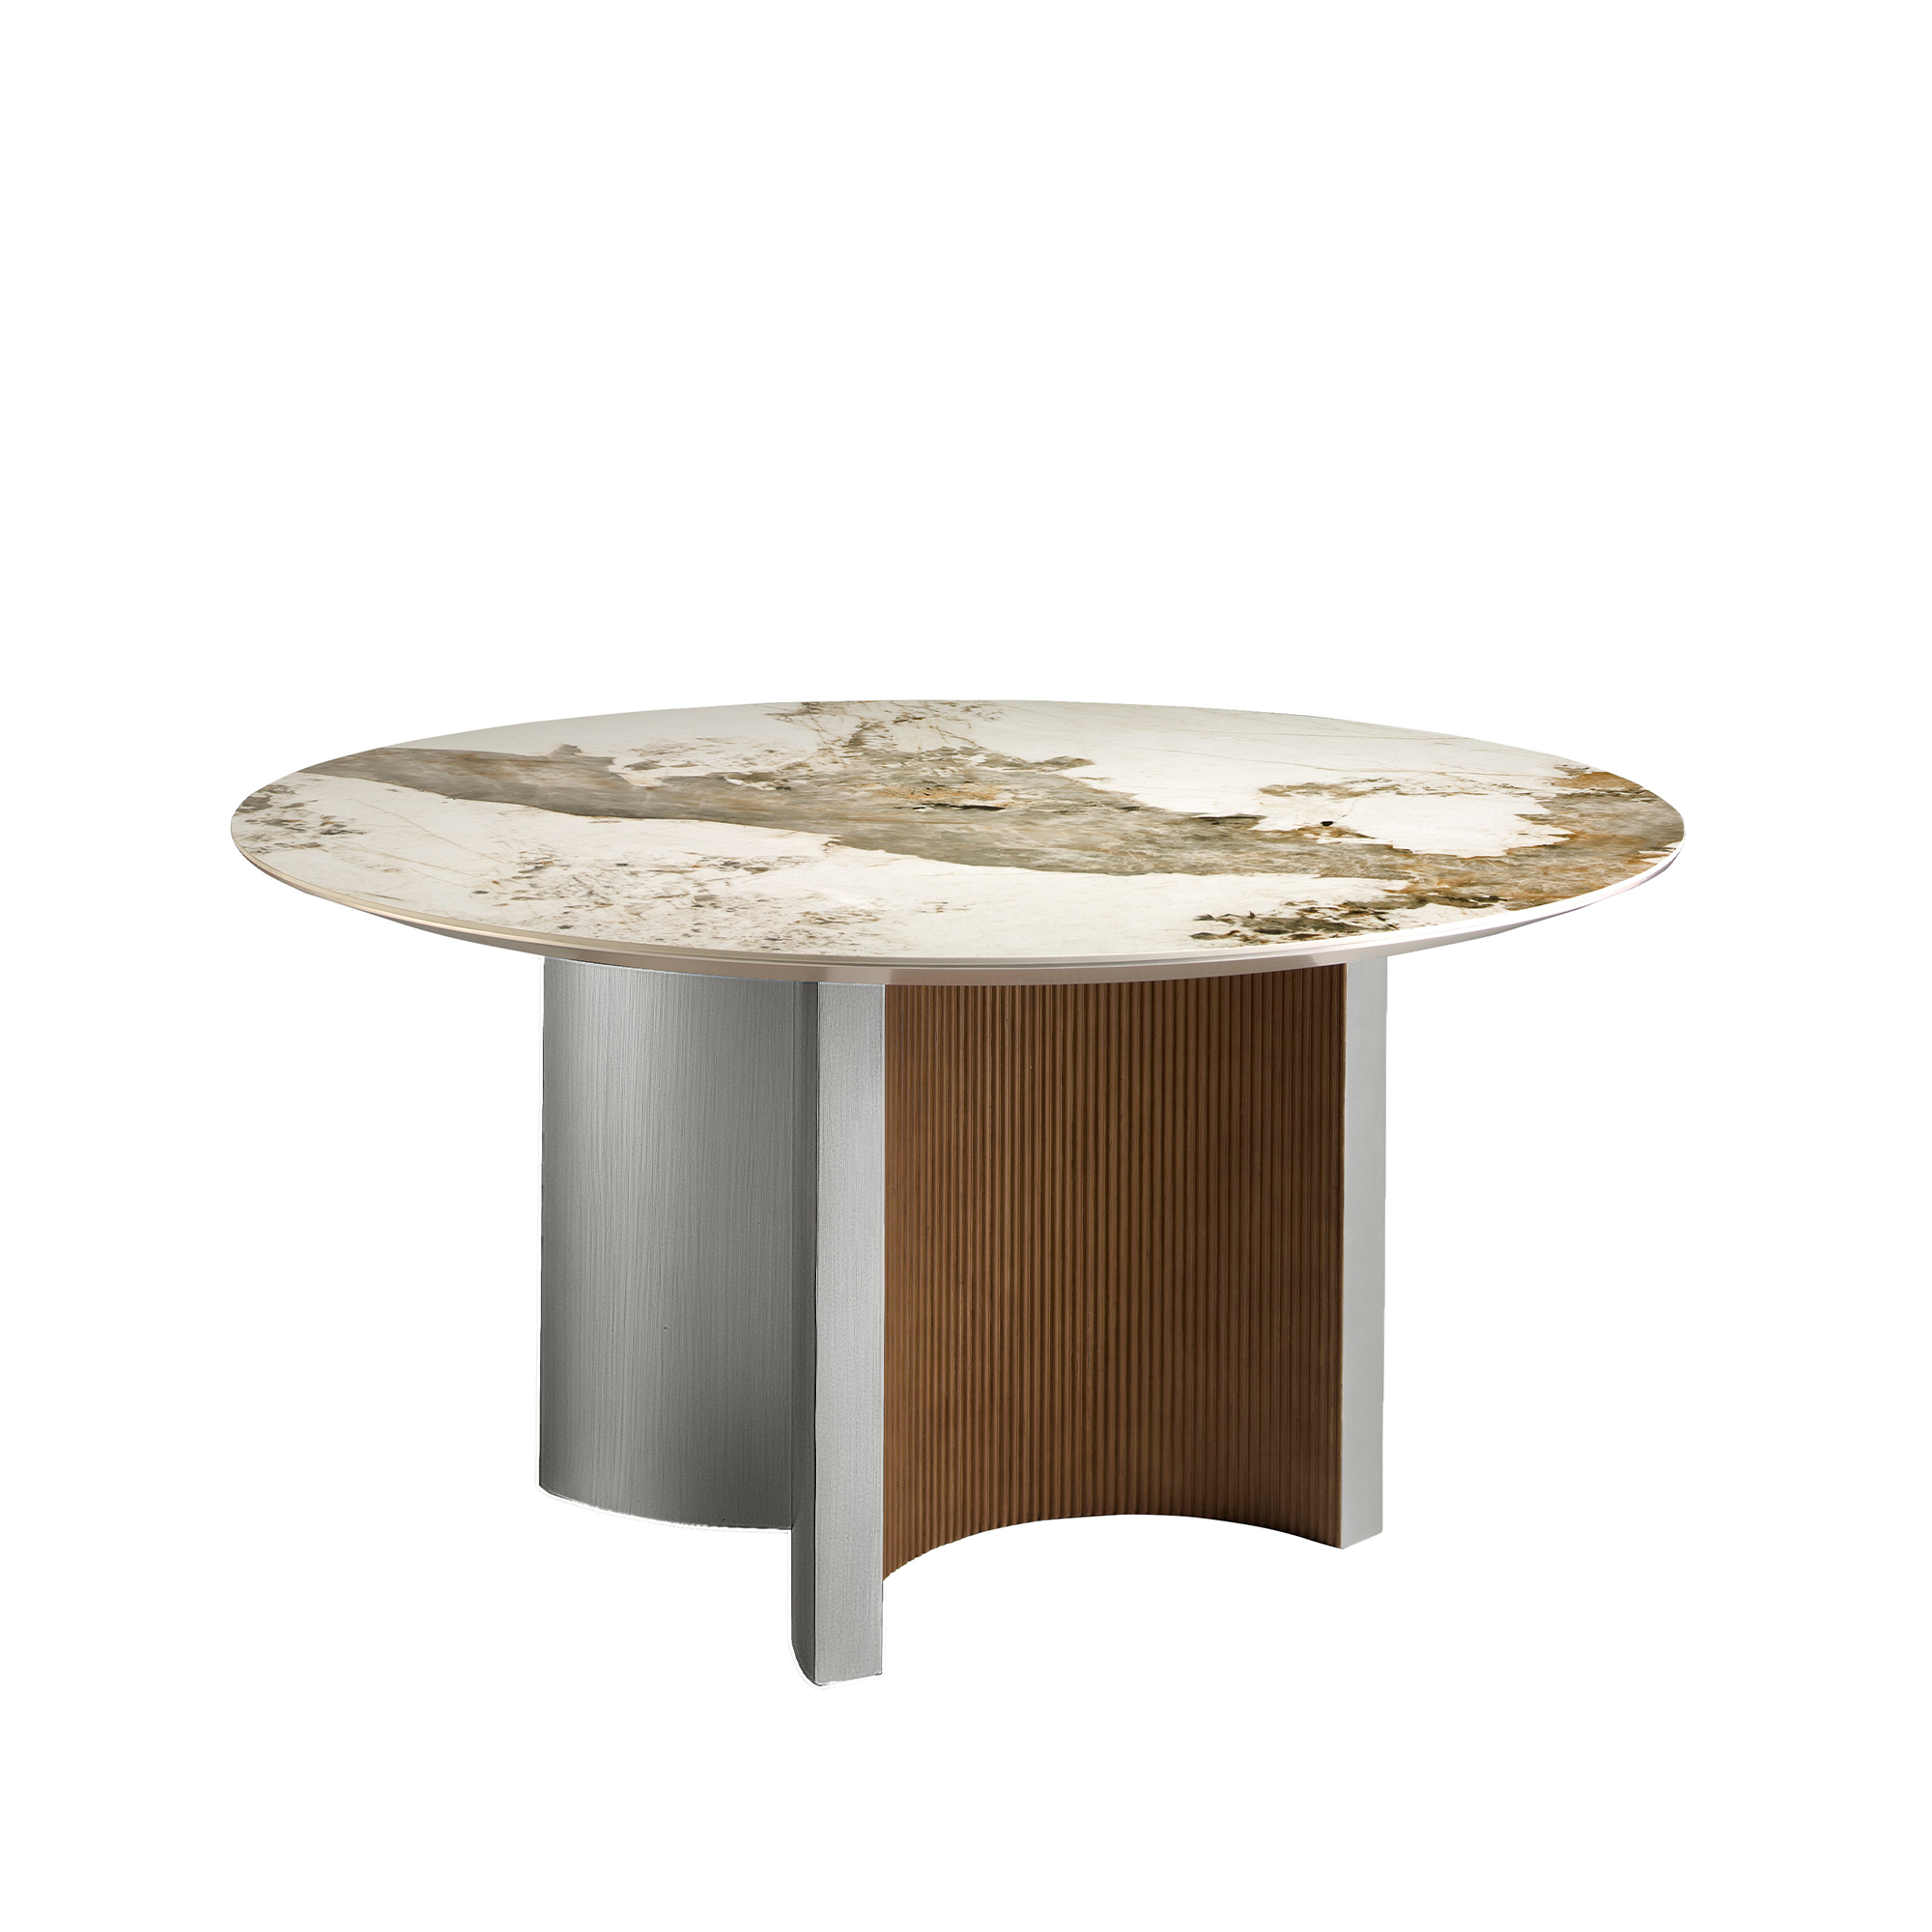 Round dining table in porcelain marble, walnut and silver-coloured wood